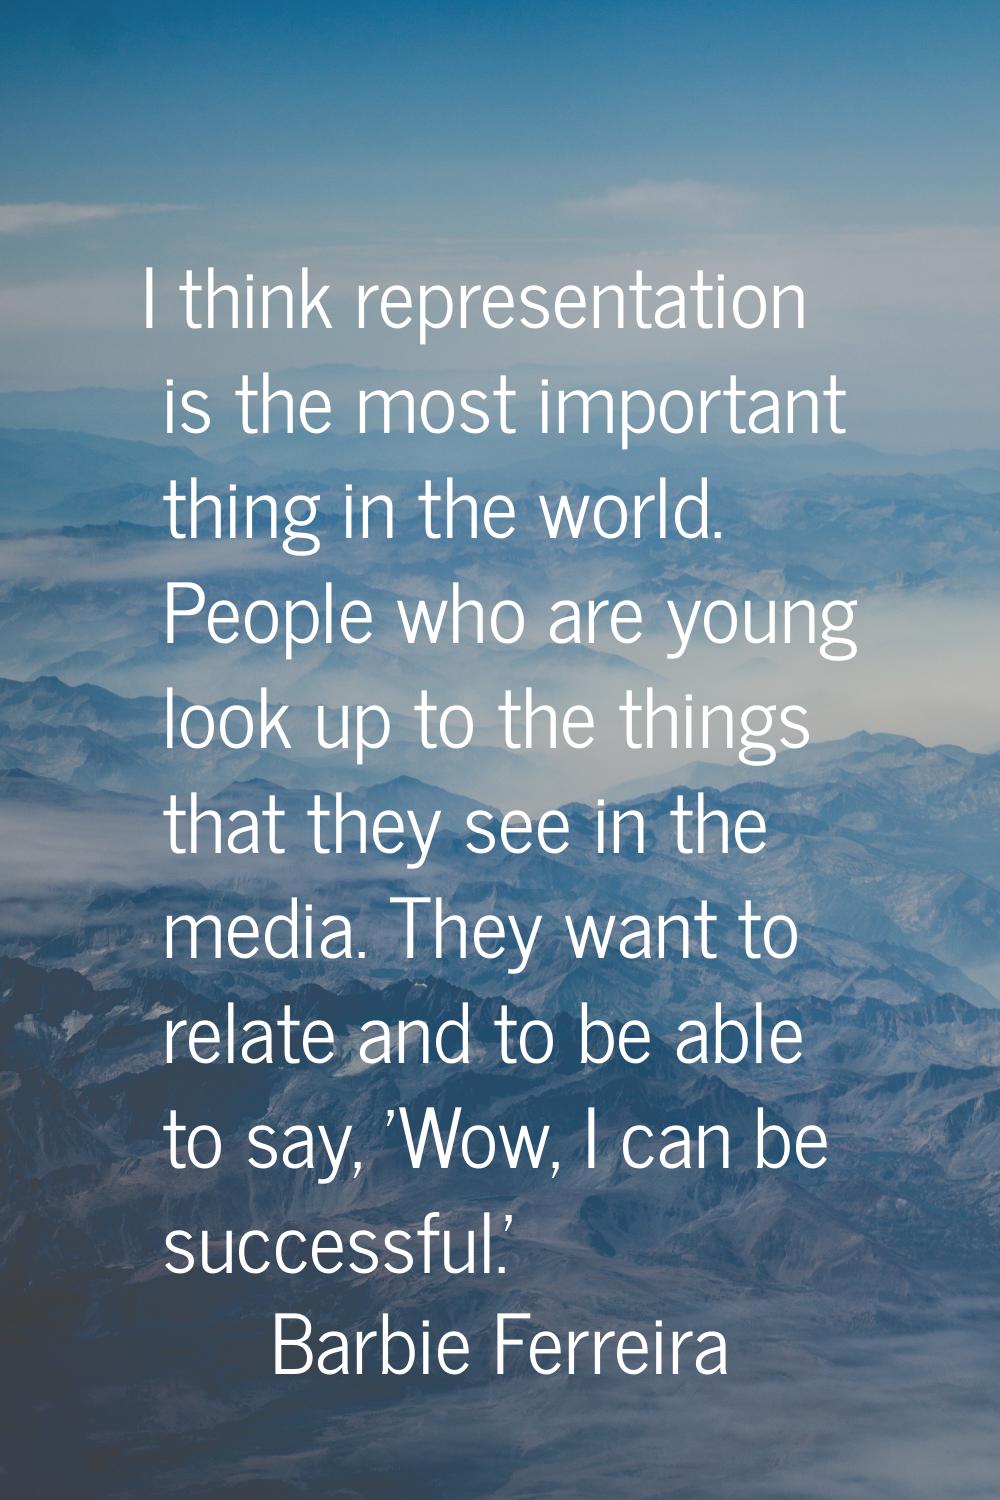 I think representation is the most important thing in the world. People who are young look up to th